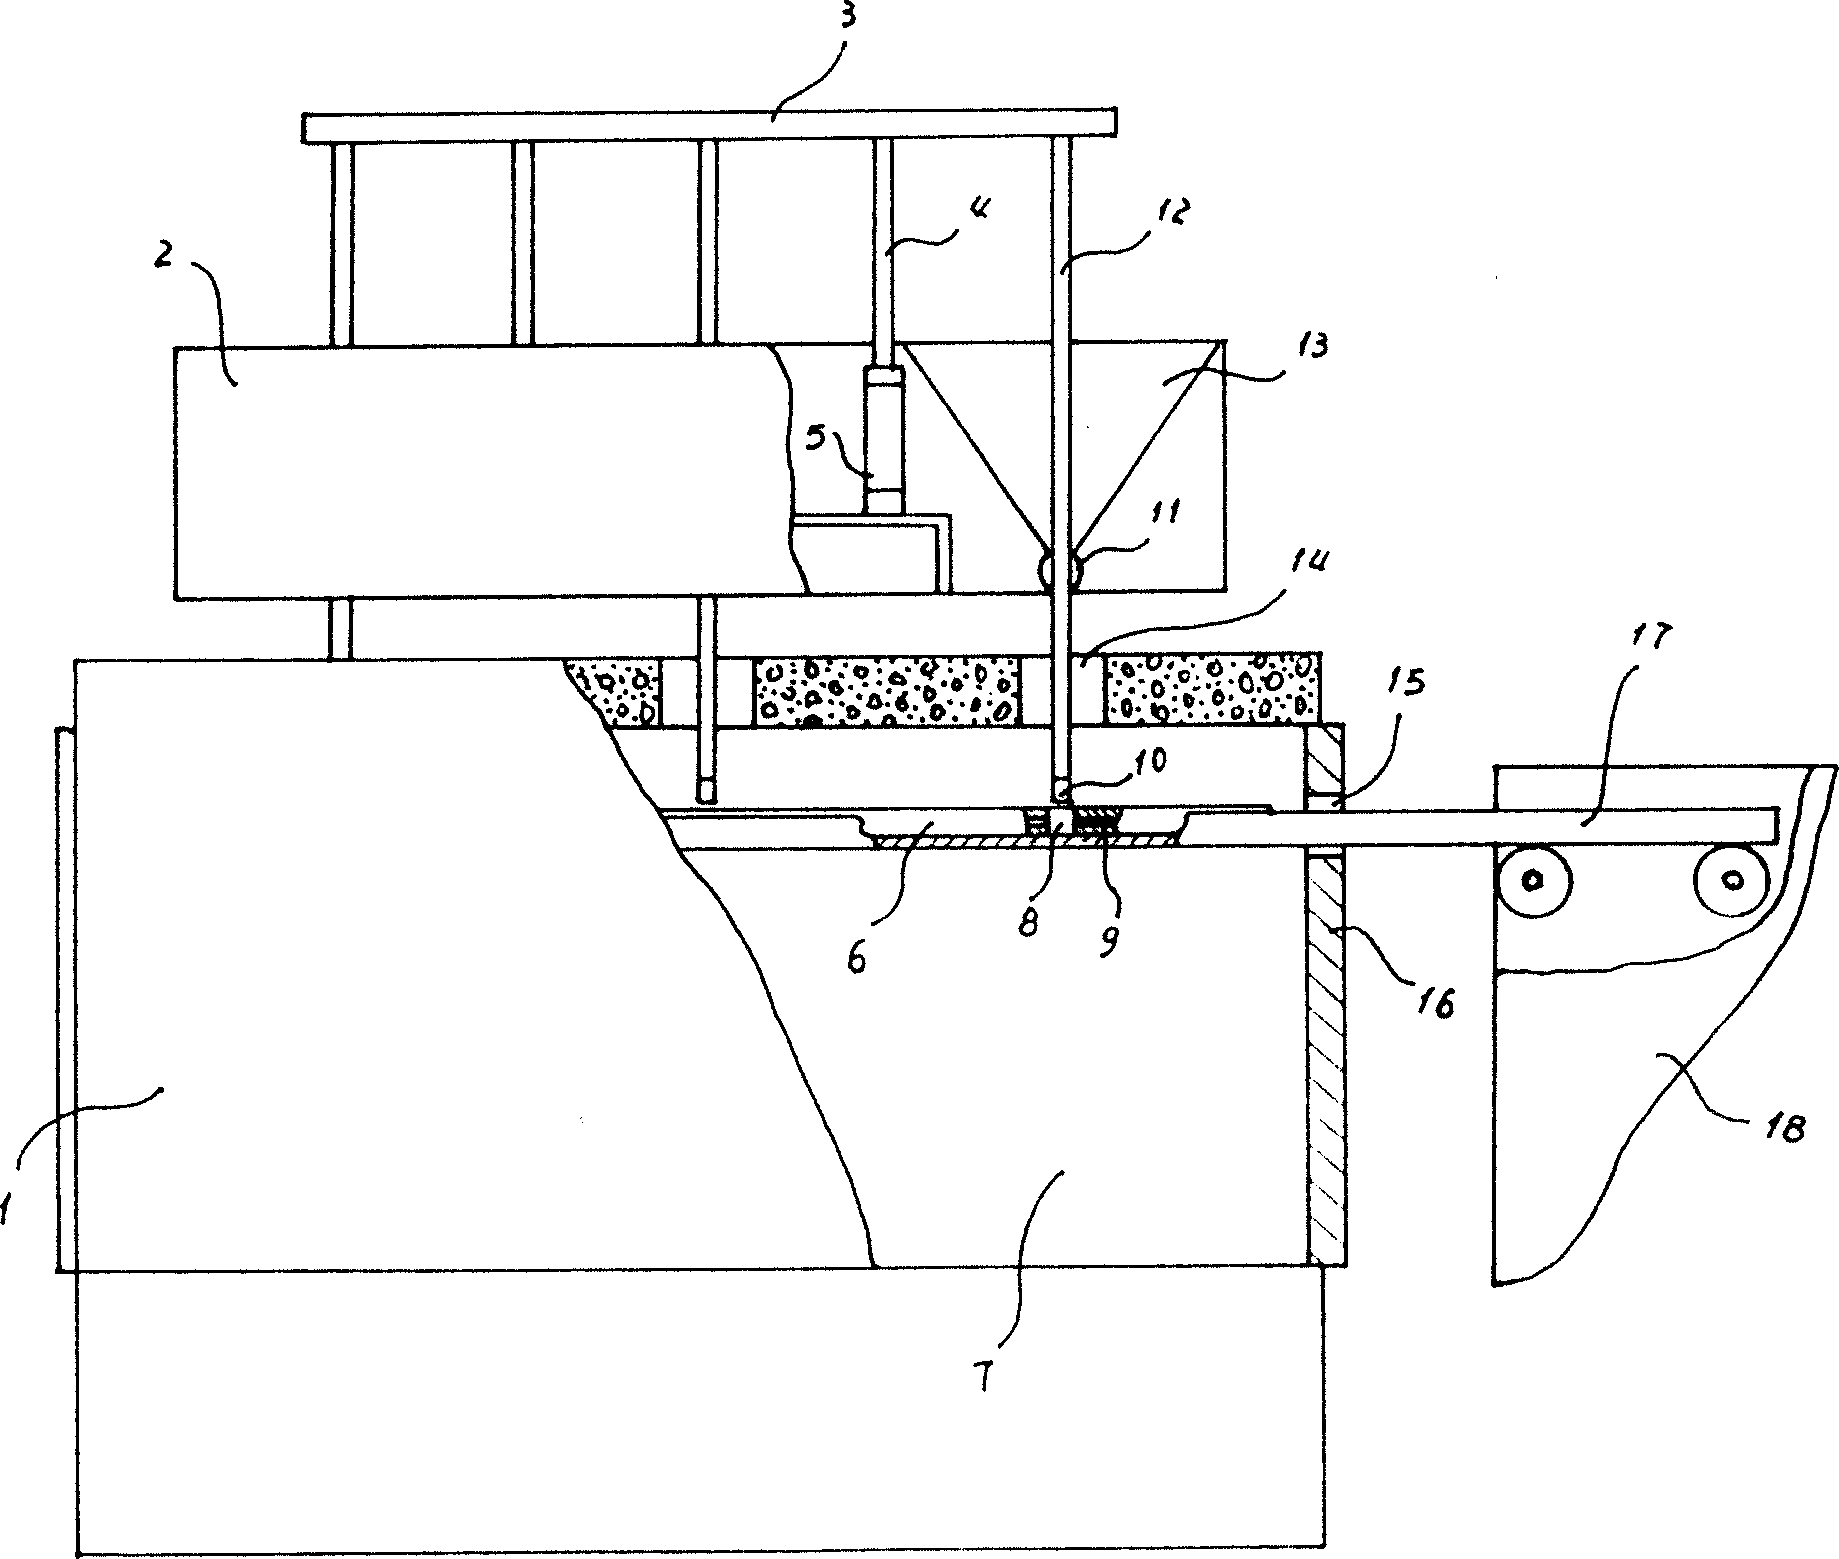 Coke stamping method and apparatus for top coal loading coke oven